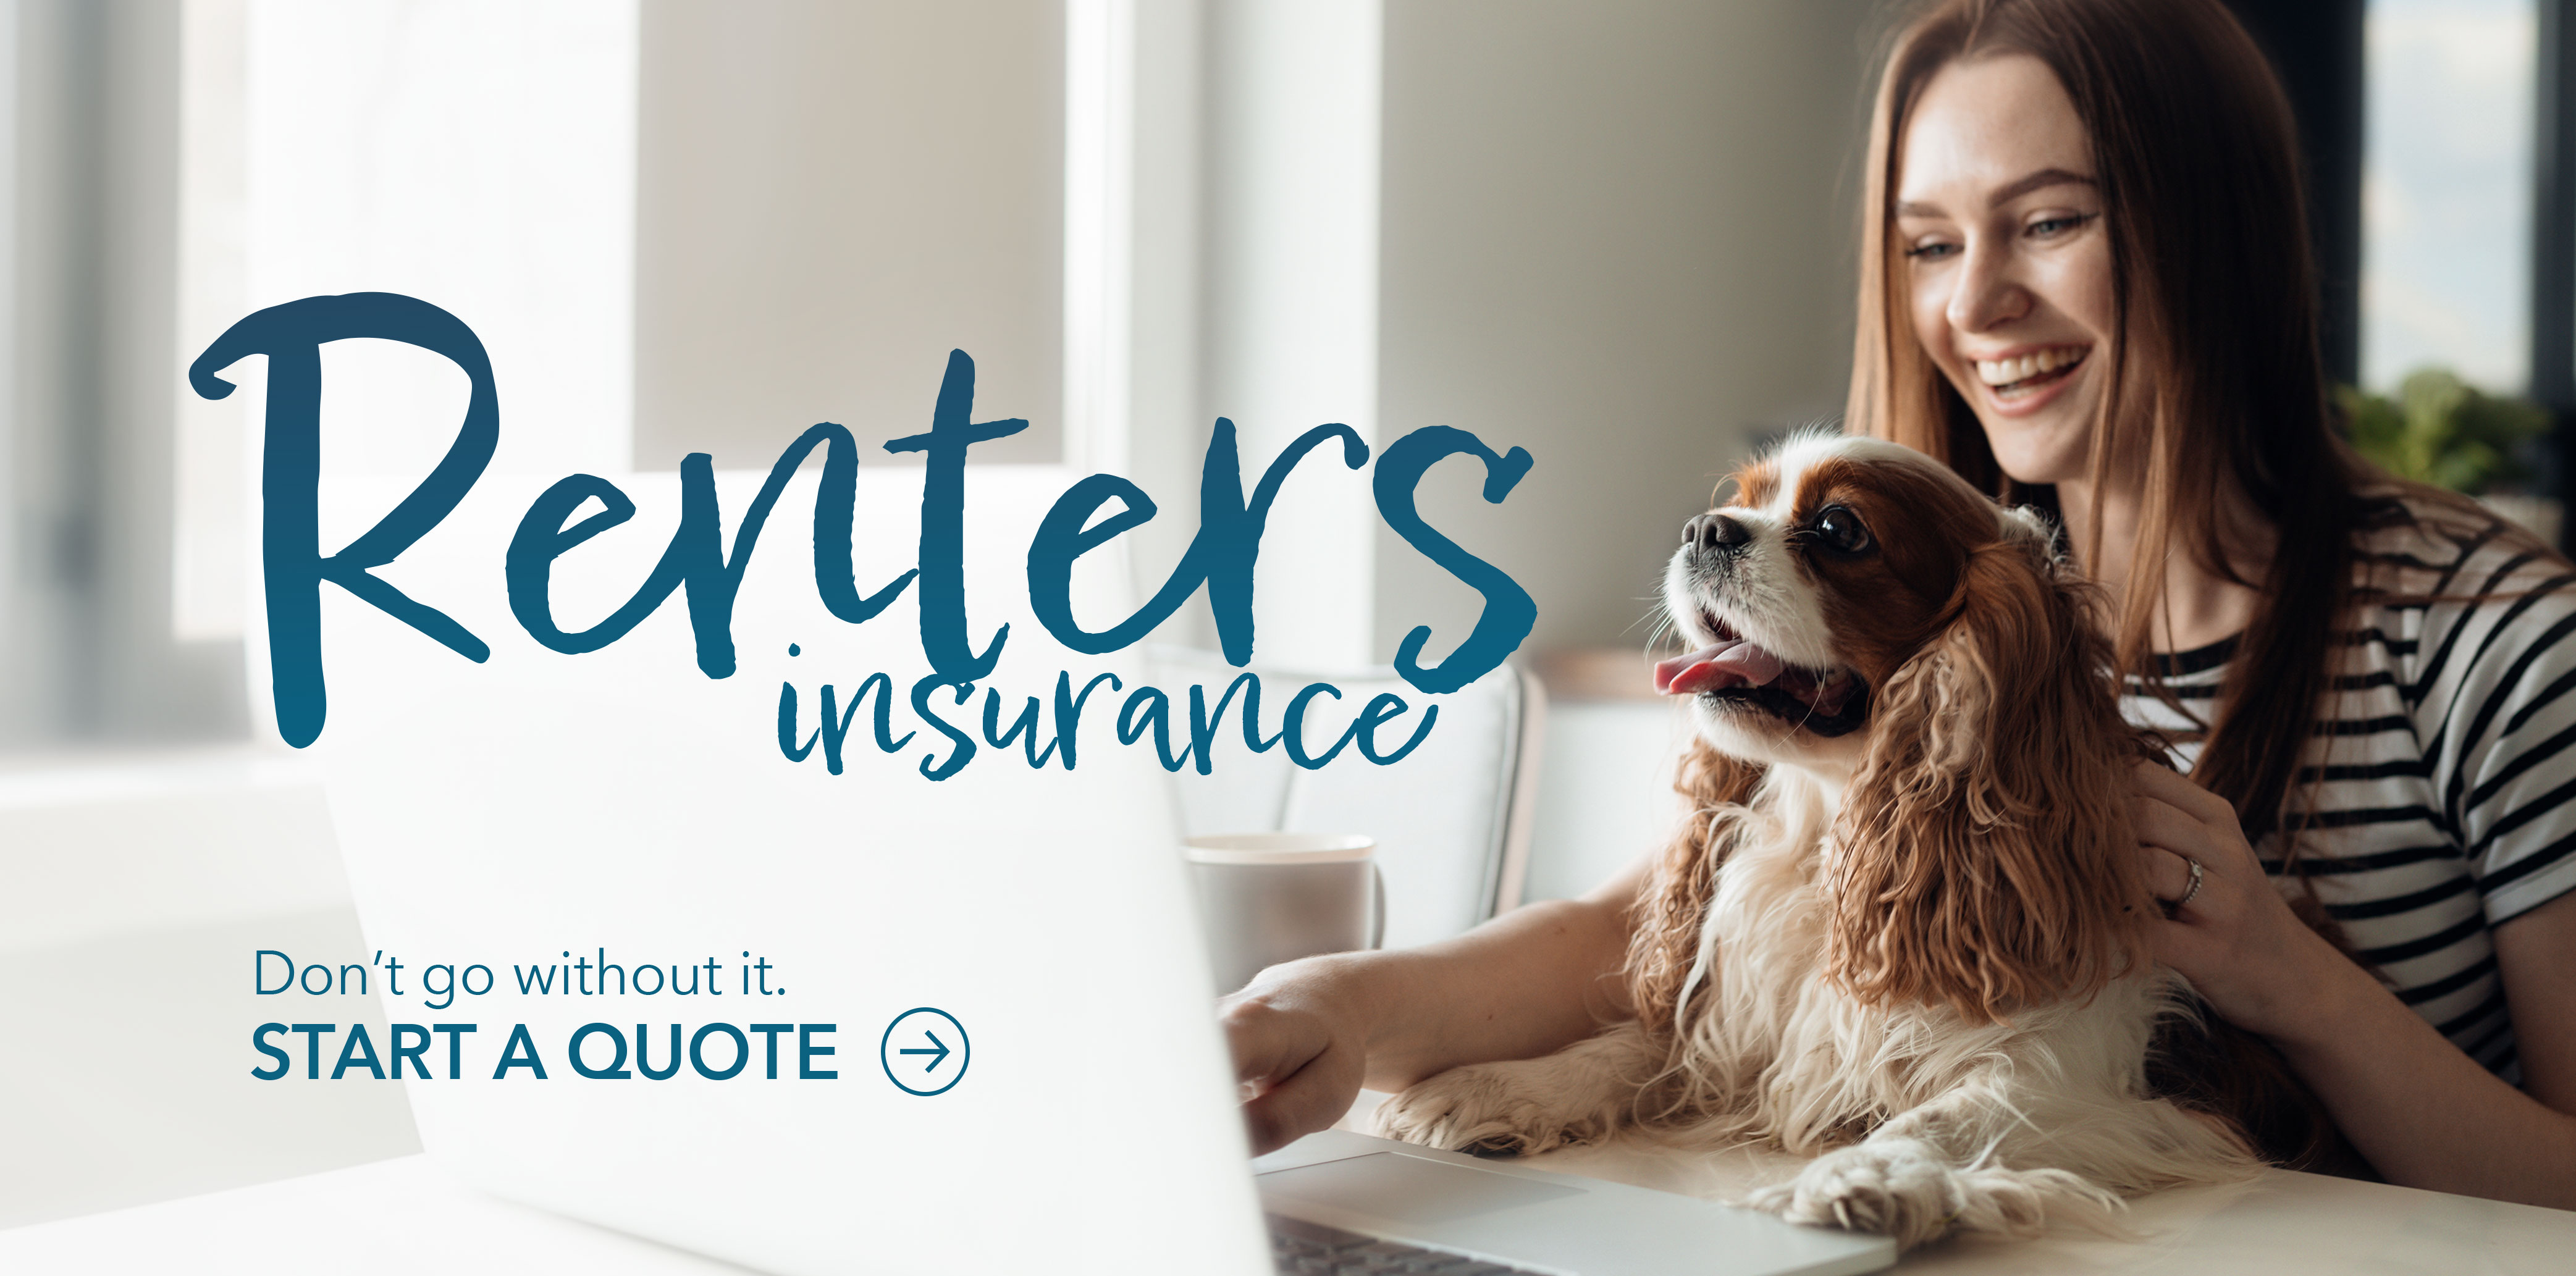 Get a Renters Insurance Quote in under 5 minutes!